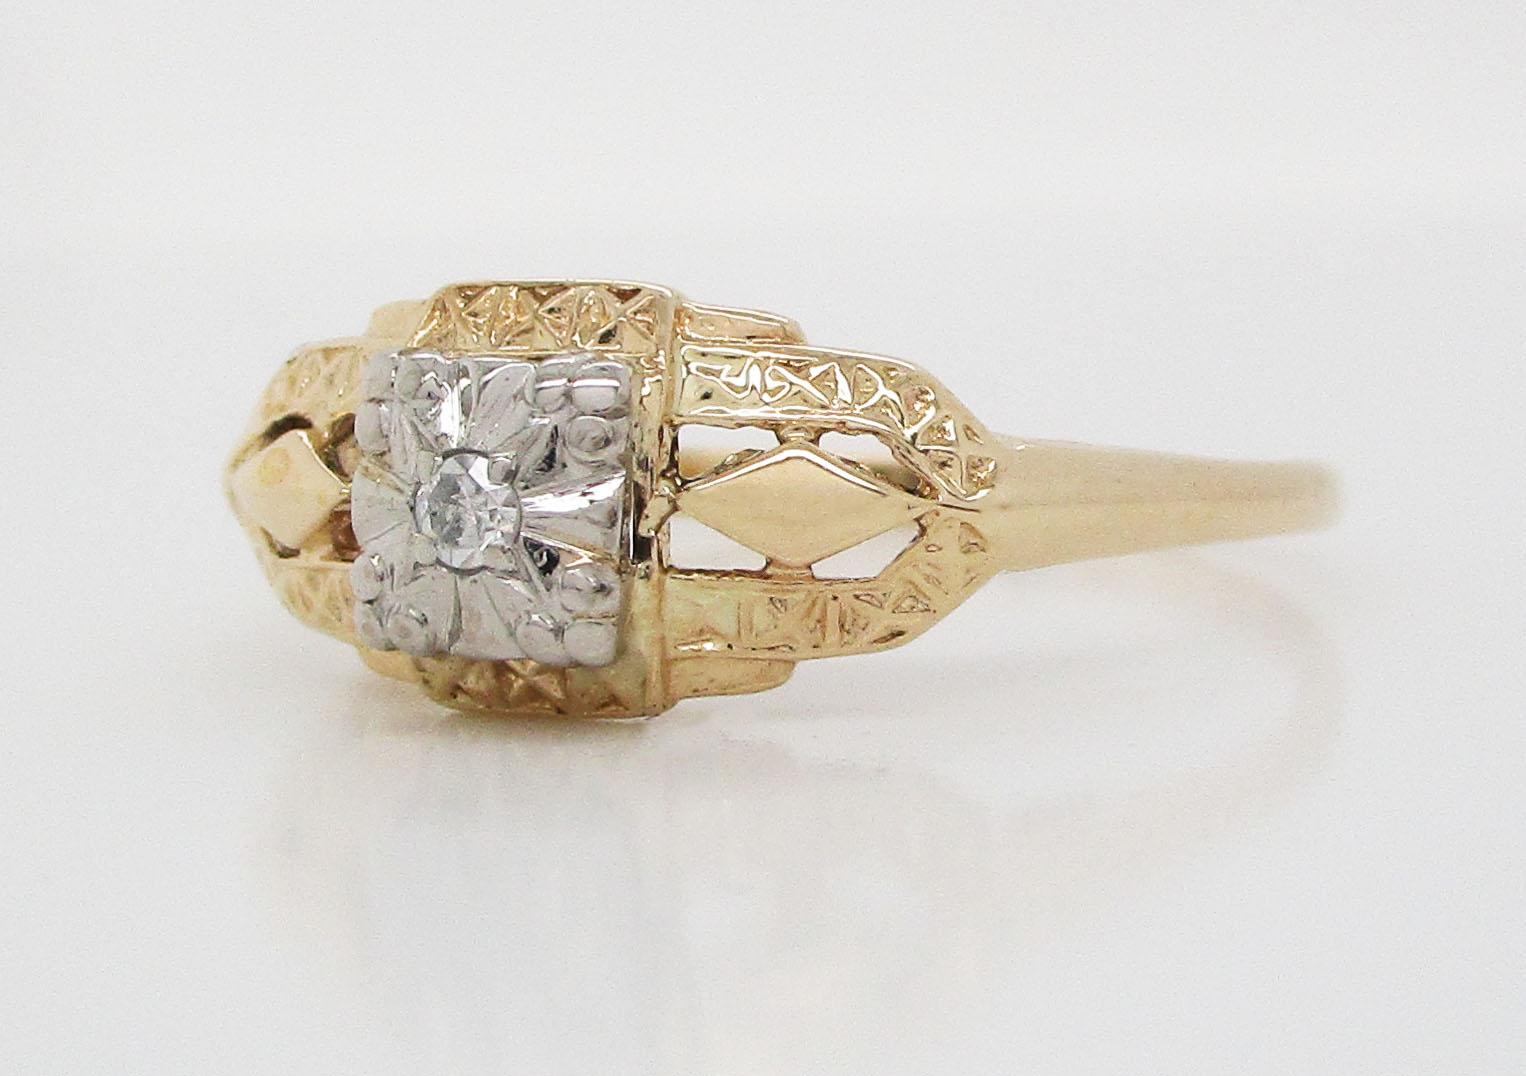 This is a beautiful mid-century ring in 14k white and yellow gold featuring a great dimensional design and a gorgeous center diamond! The design of the ring is unique and features two tones of gold and an excellent architectural look. The shoulders